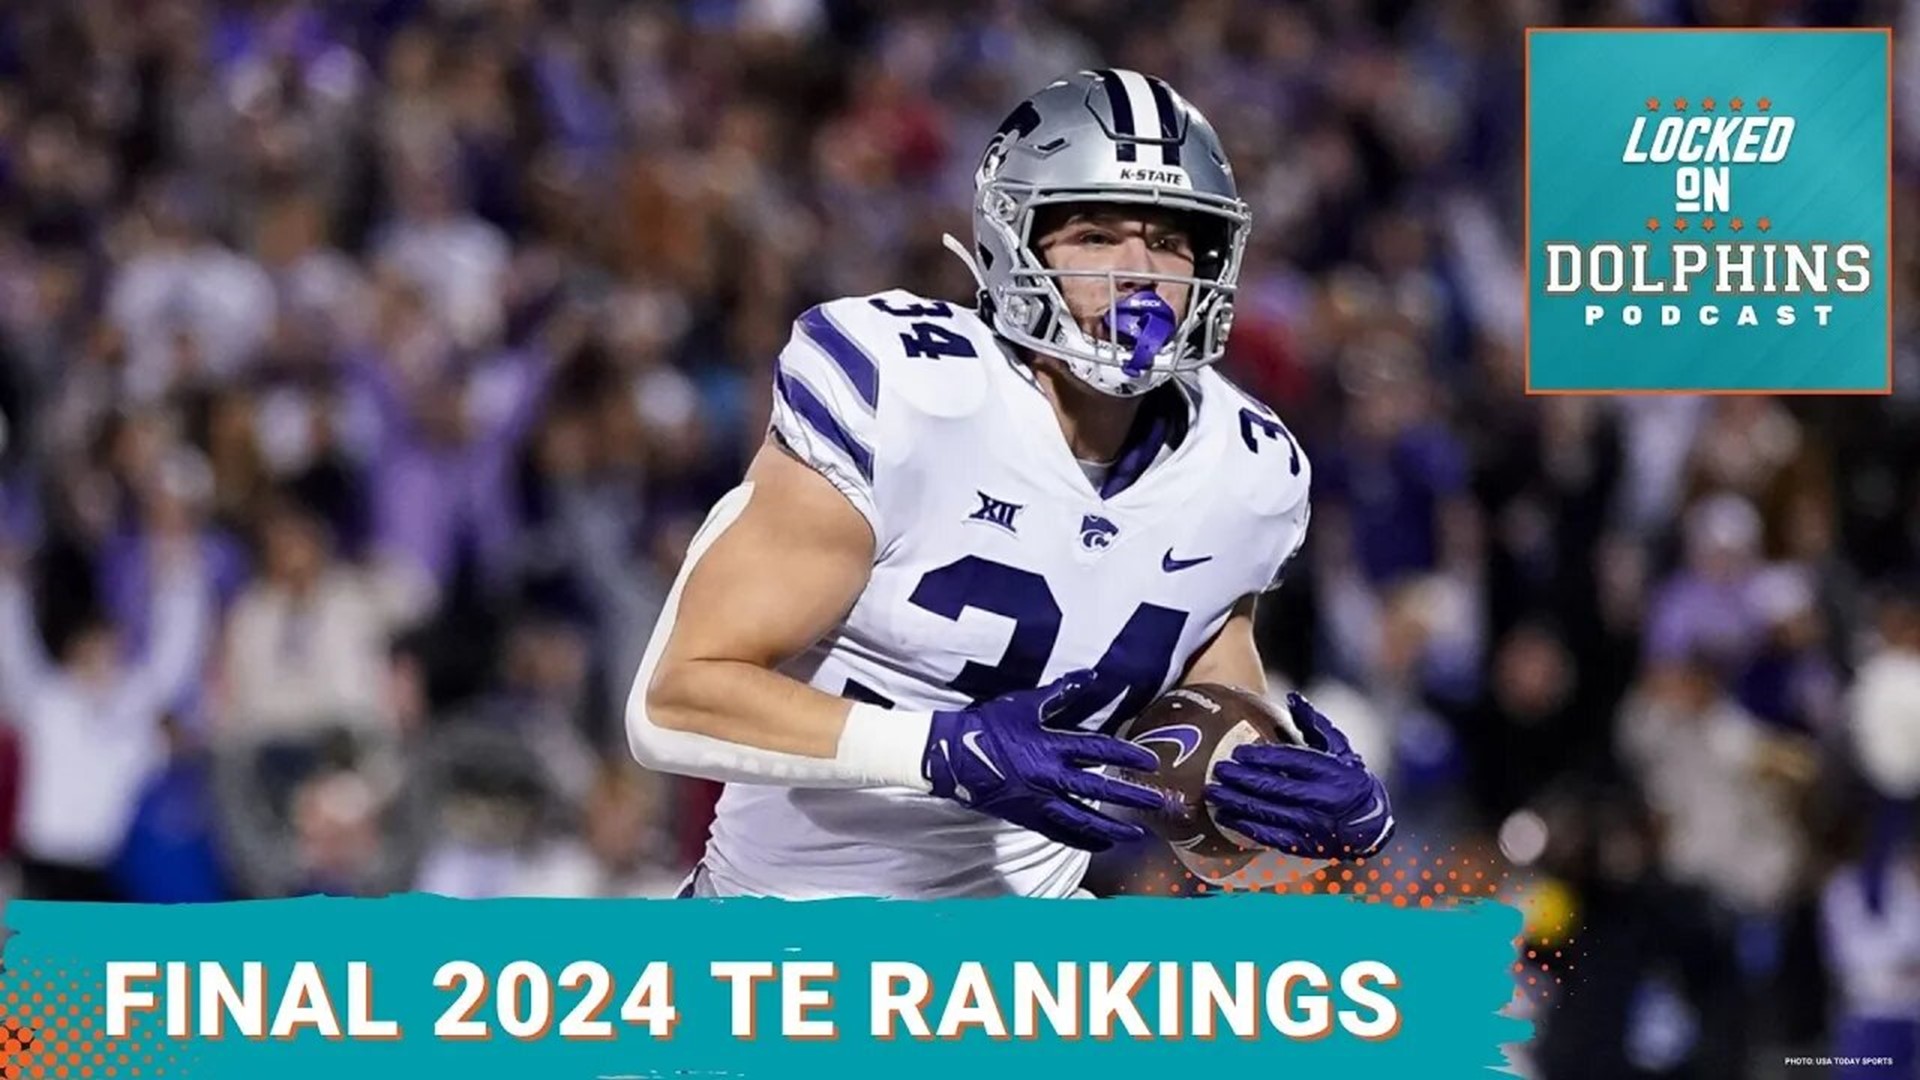 Brock Bowers or bust? Most certainly not! The Miami Dolphins only have a limited number of draft picks in the top-150 of the 2024 NFL Draft.